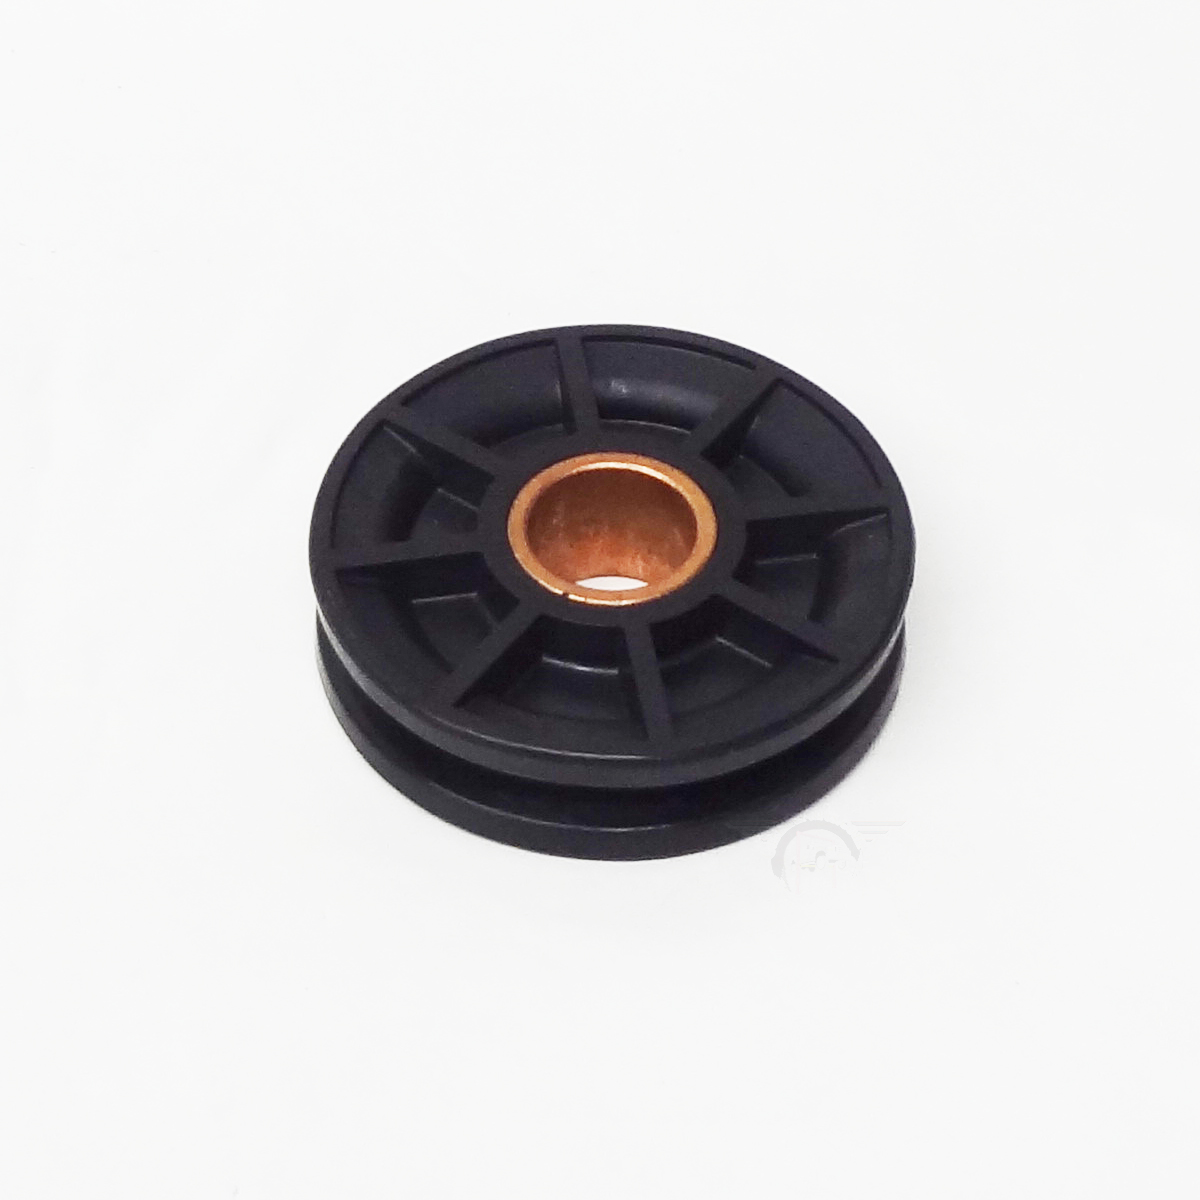 Challenger lift CL9 Plastic Cable Pulley / Sheave A1041